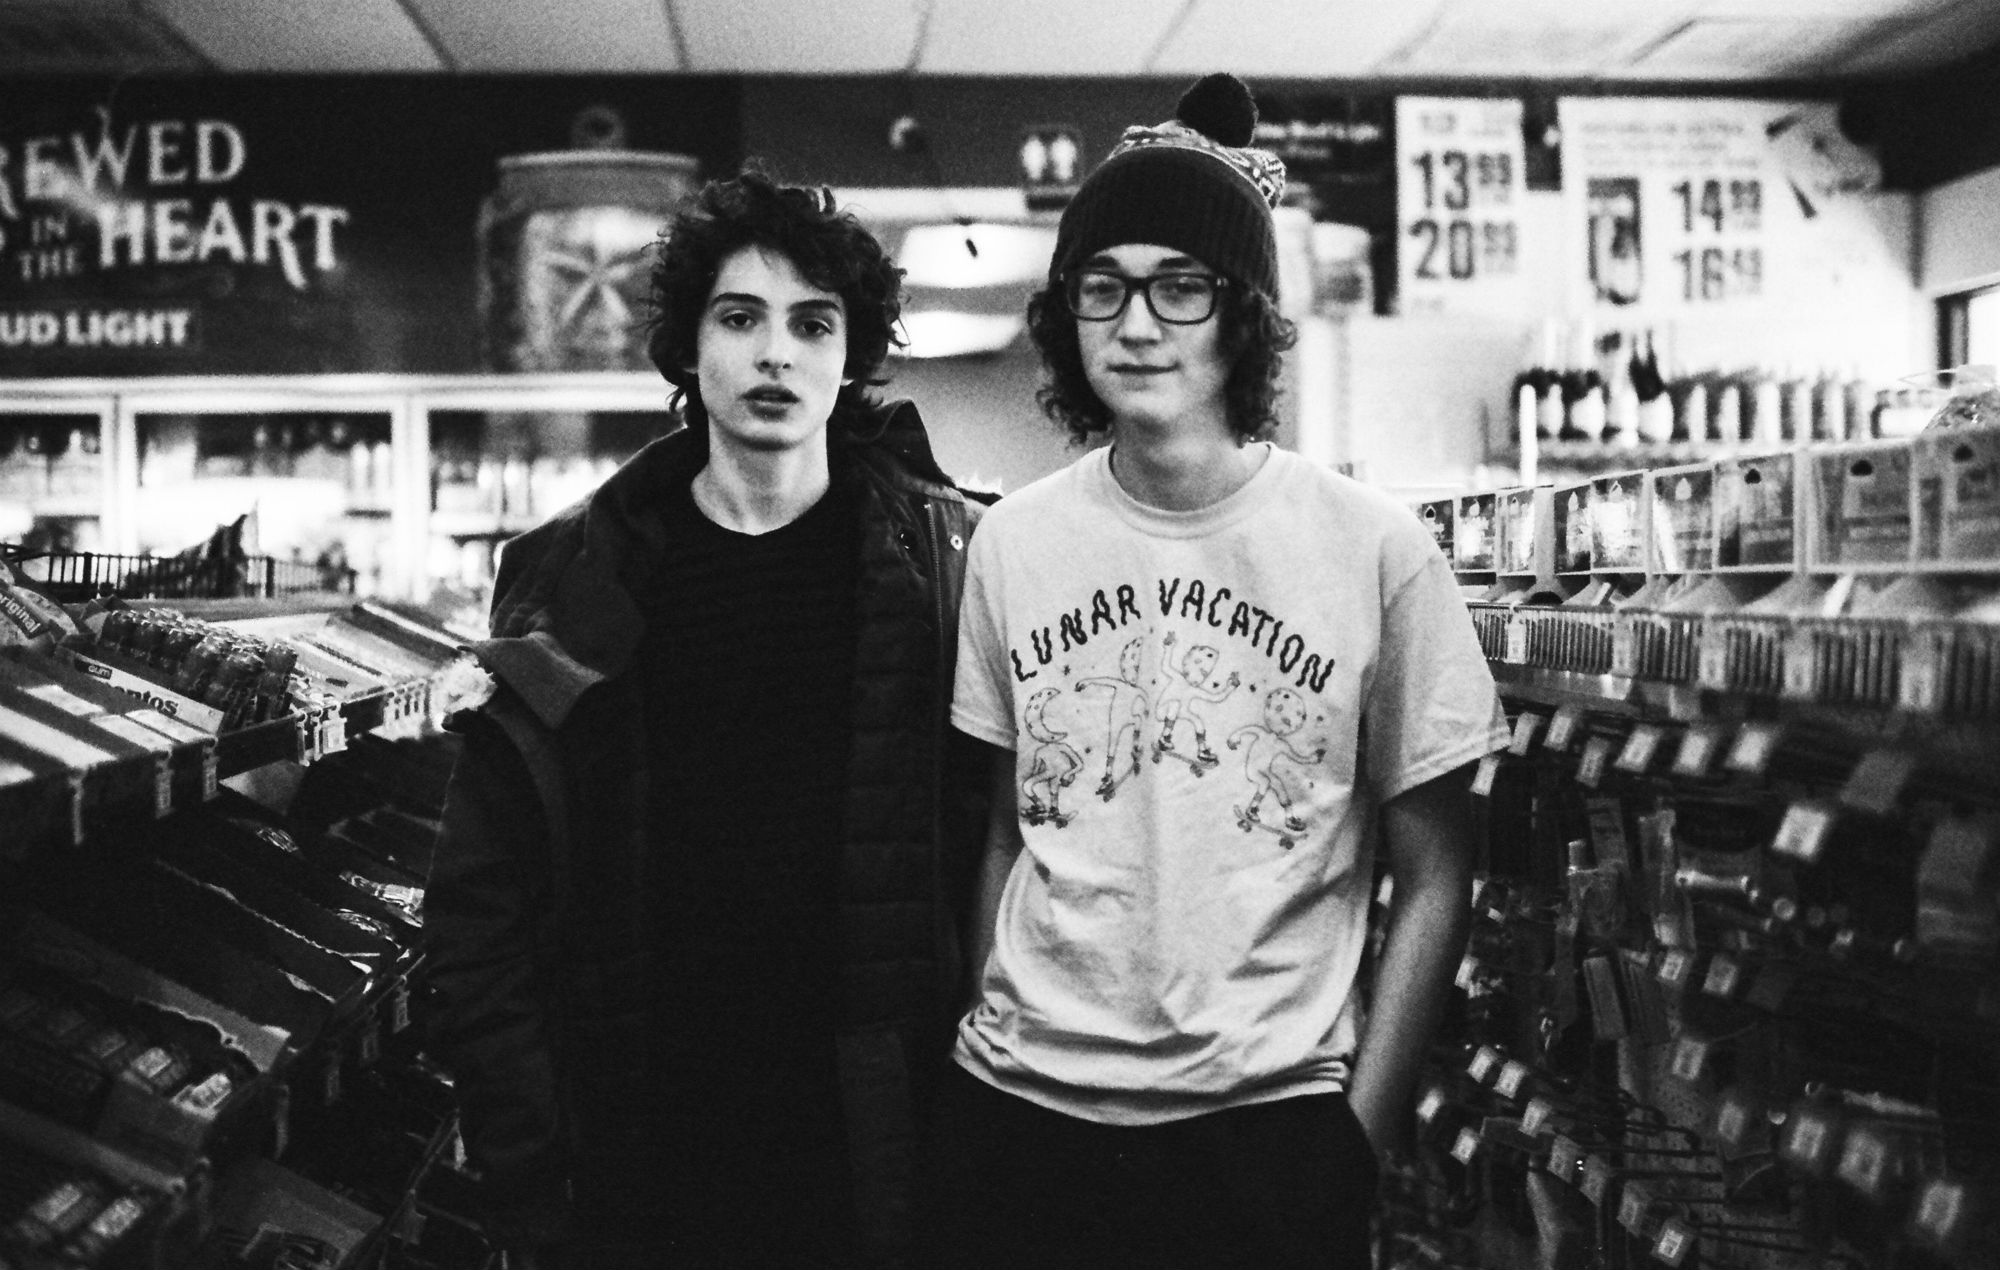 Finn Wolfhard on new band The Aubreys: “We wanted to mix the craziness of Flaming Lips with the earnestness of Wilco”